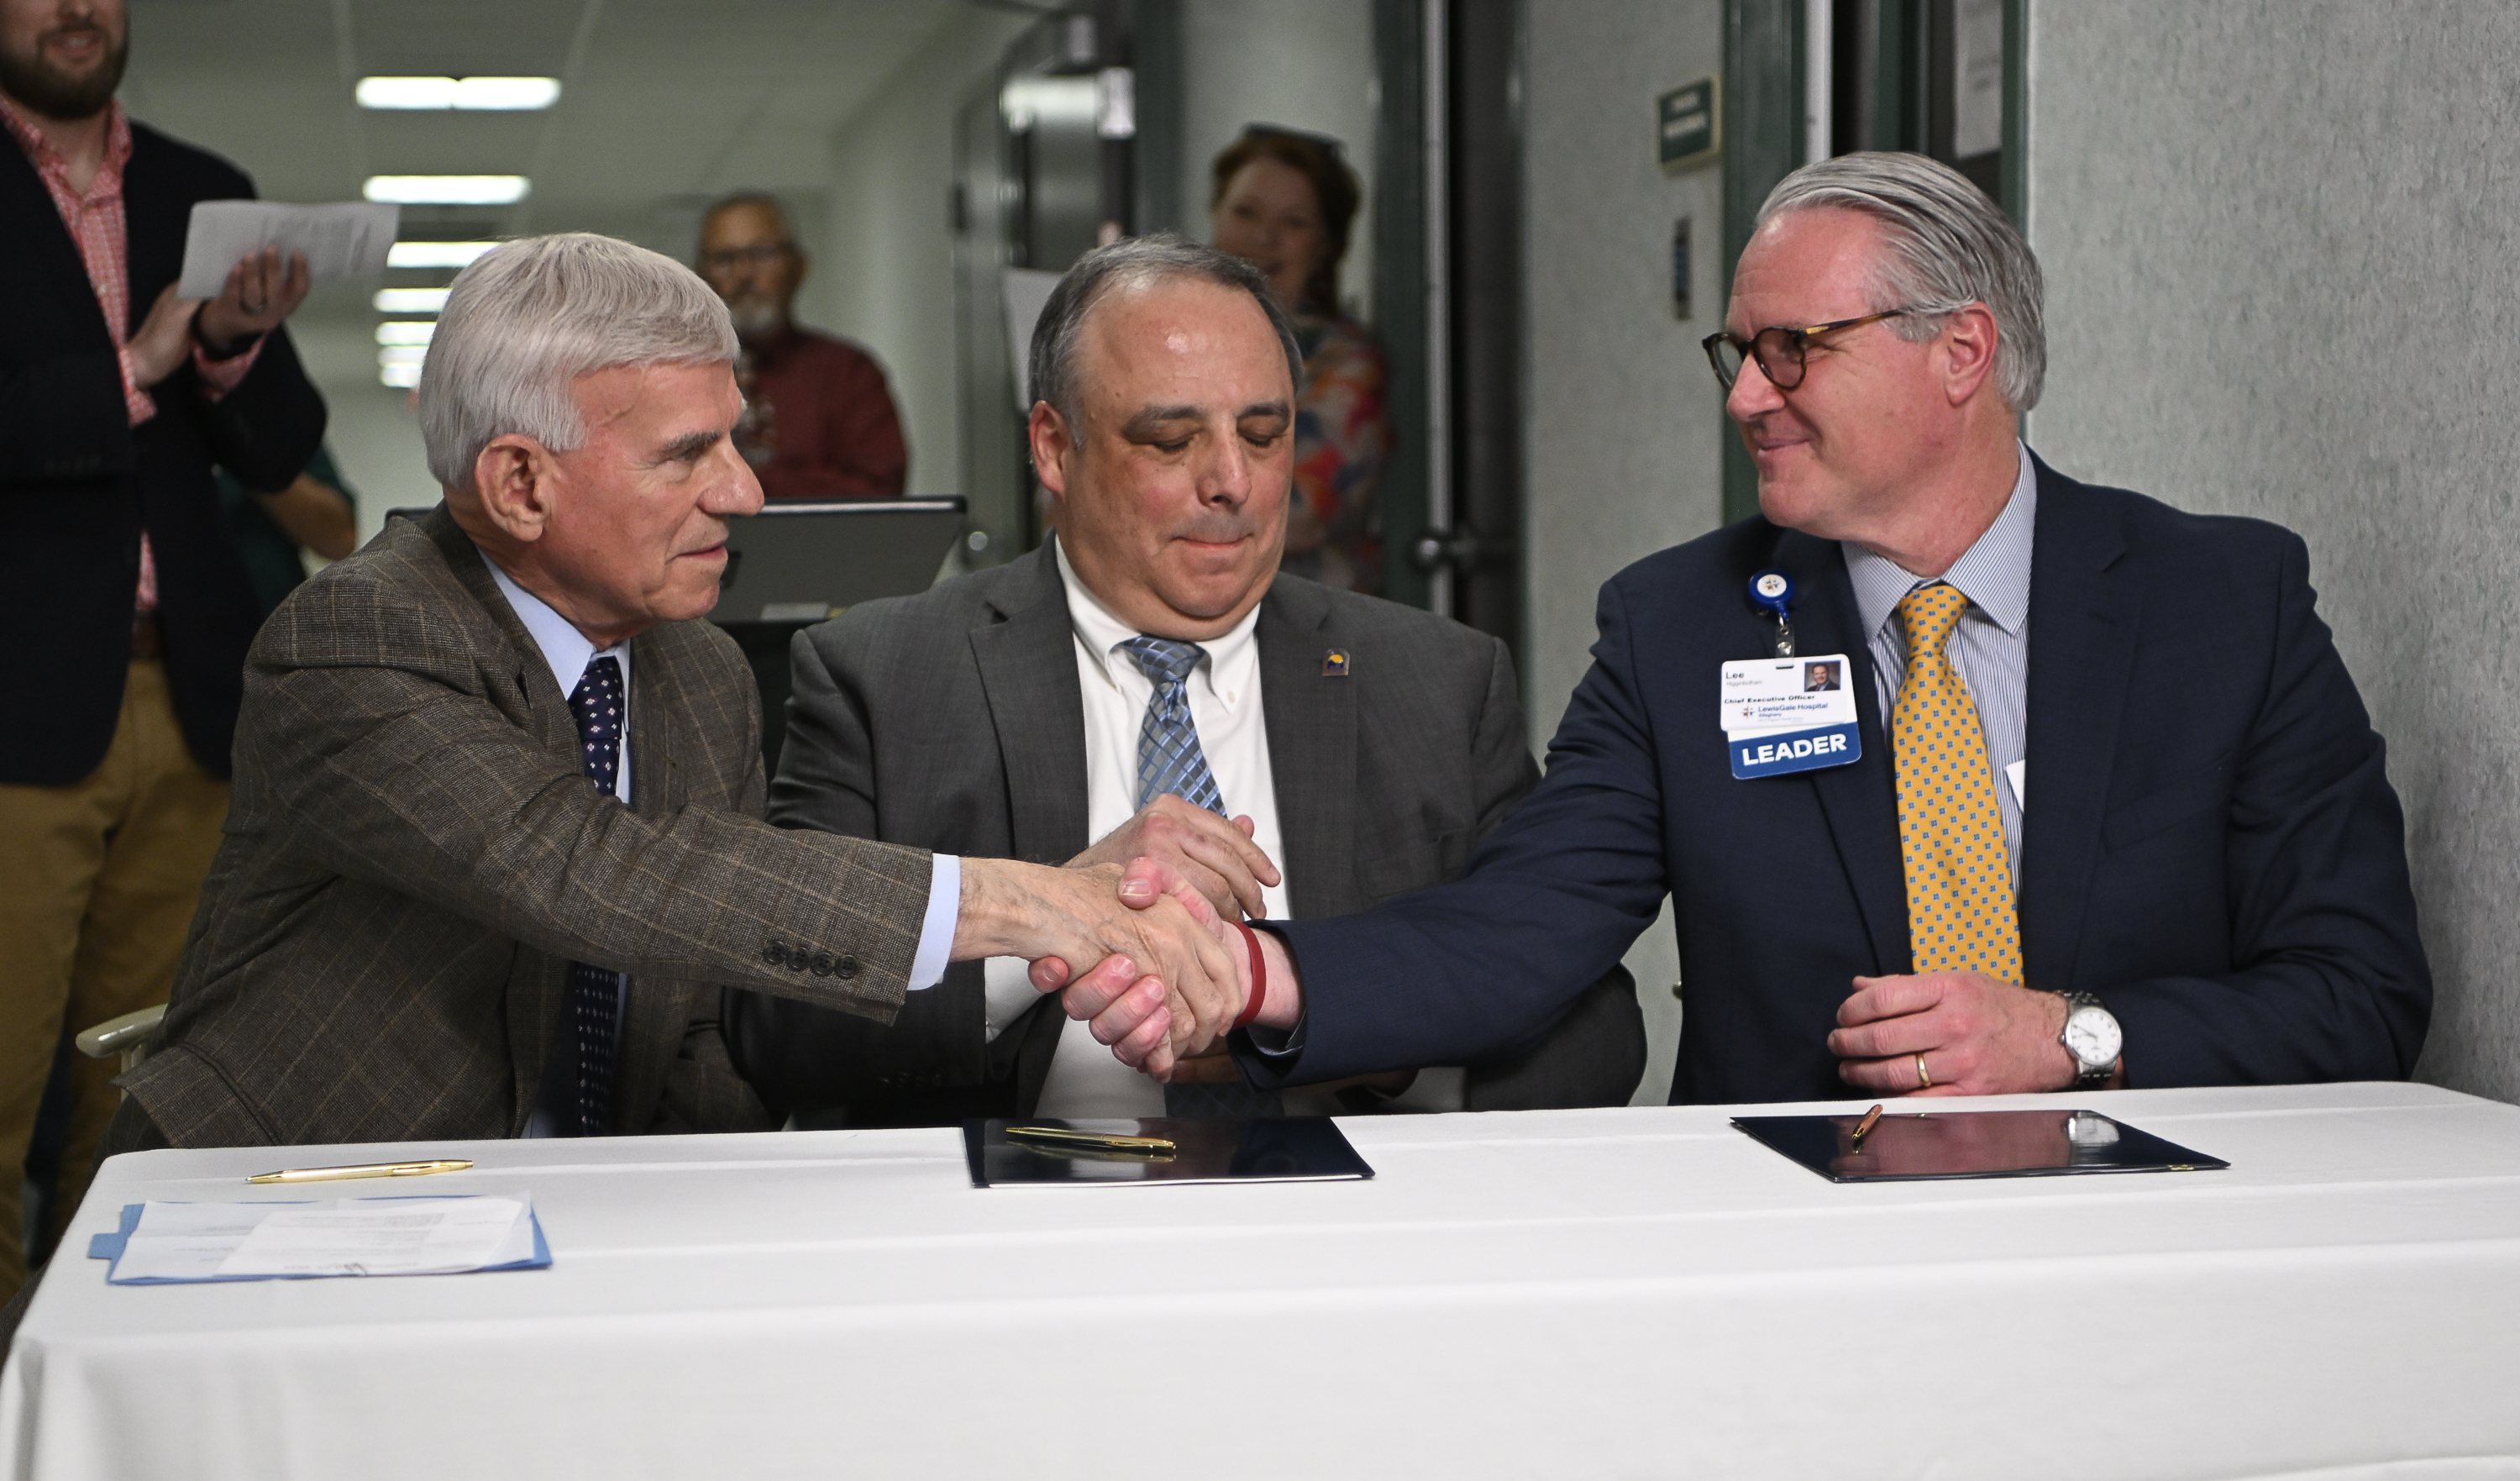 The LewisGale Hospital Alleghany CEO sits with the presidents of Virginia Western Community College and Mountain Gateway Community College to sign official paperwork regarding the new partnership.